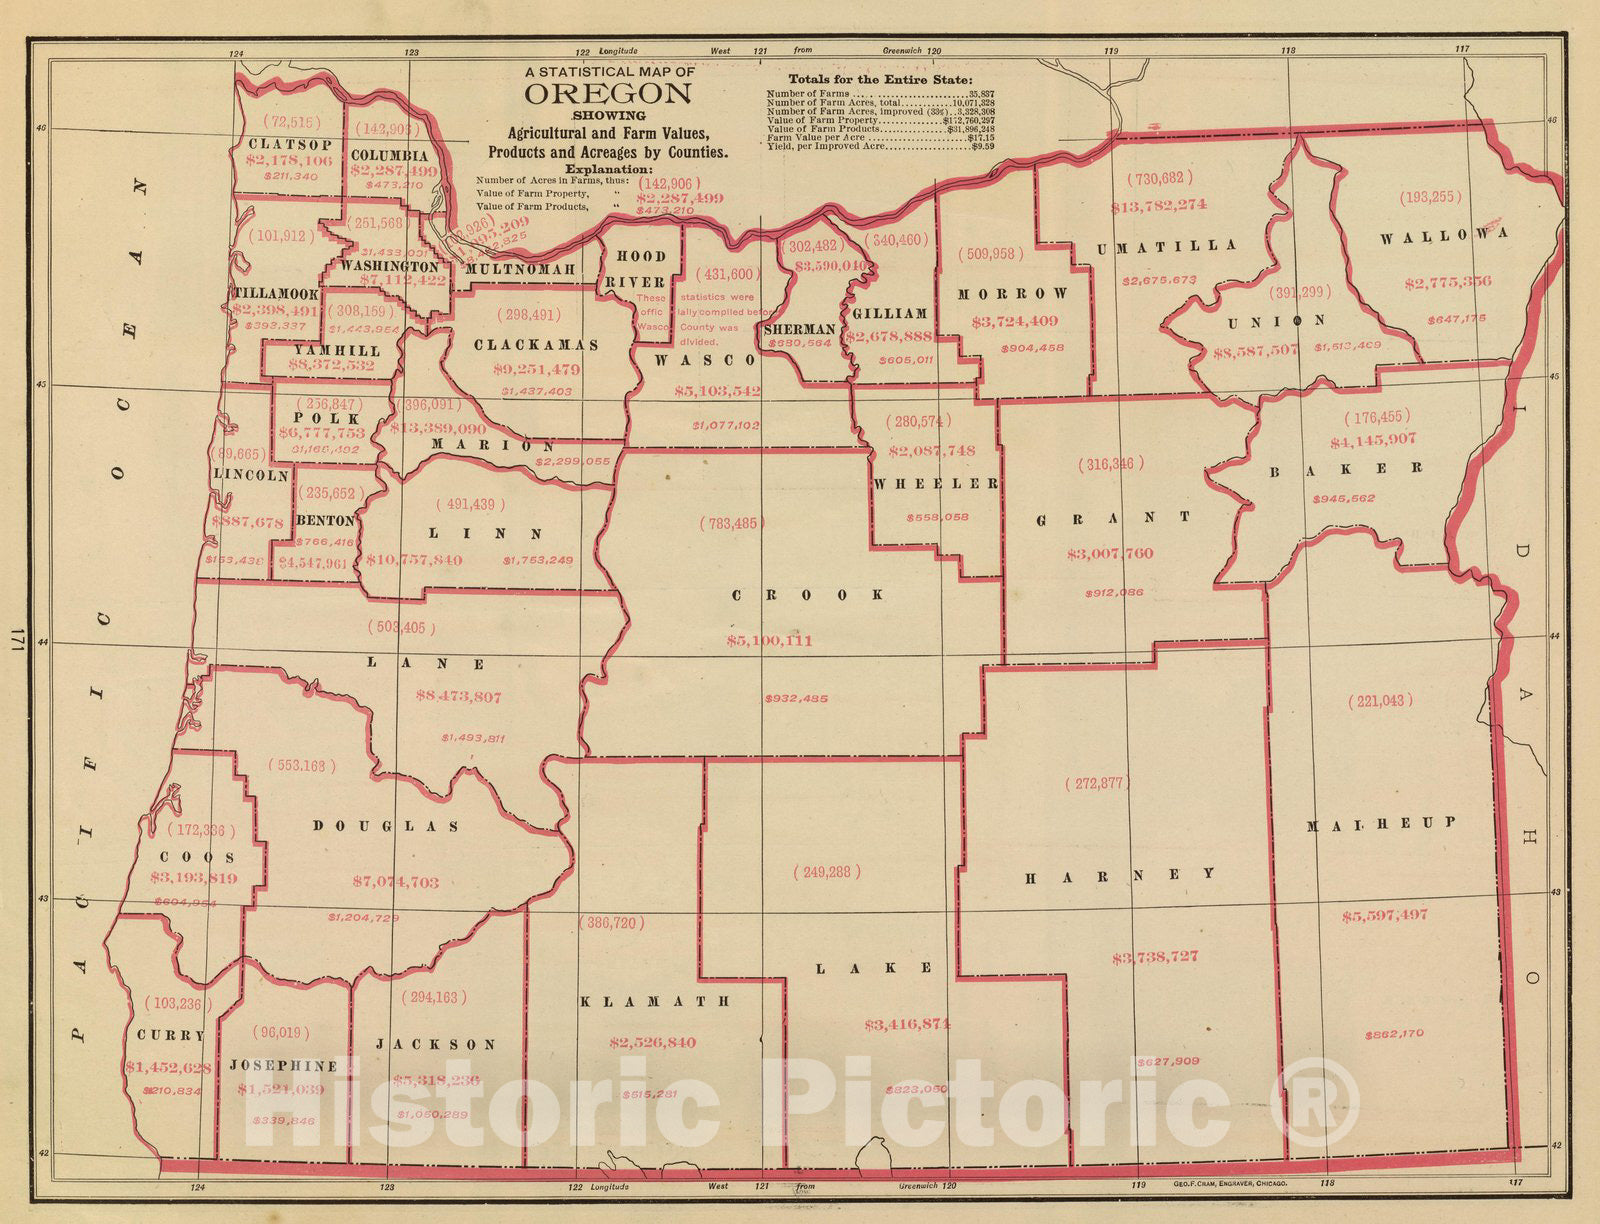 Historic Map : State Atlas Map, Oregon agric, farm values, products, acreages. 1909 - Vintage Wall Art